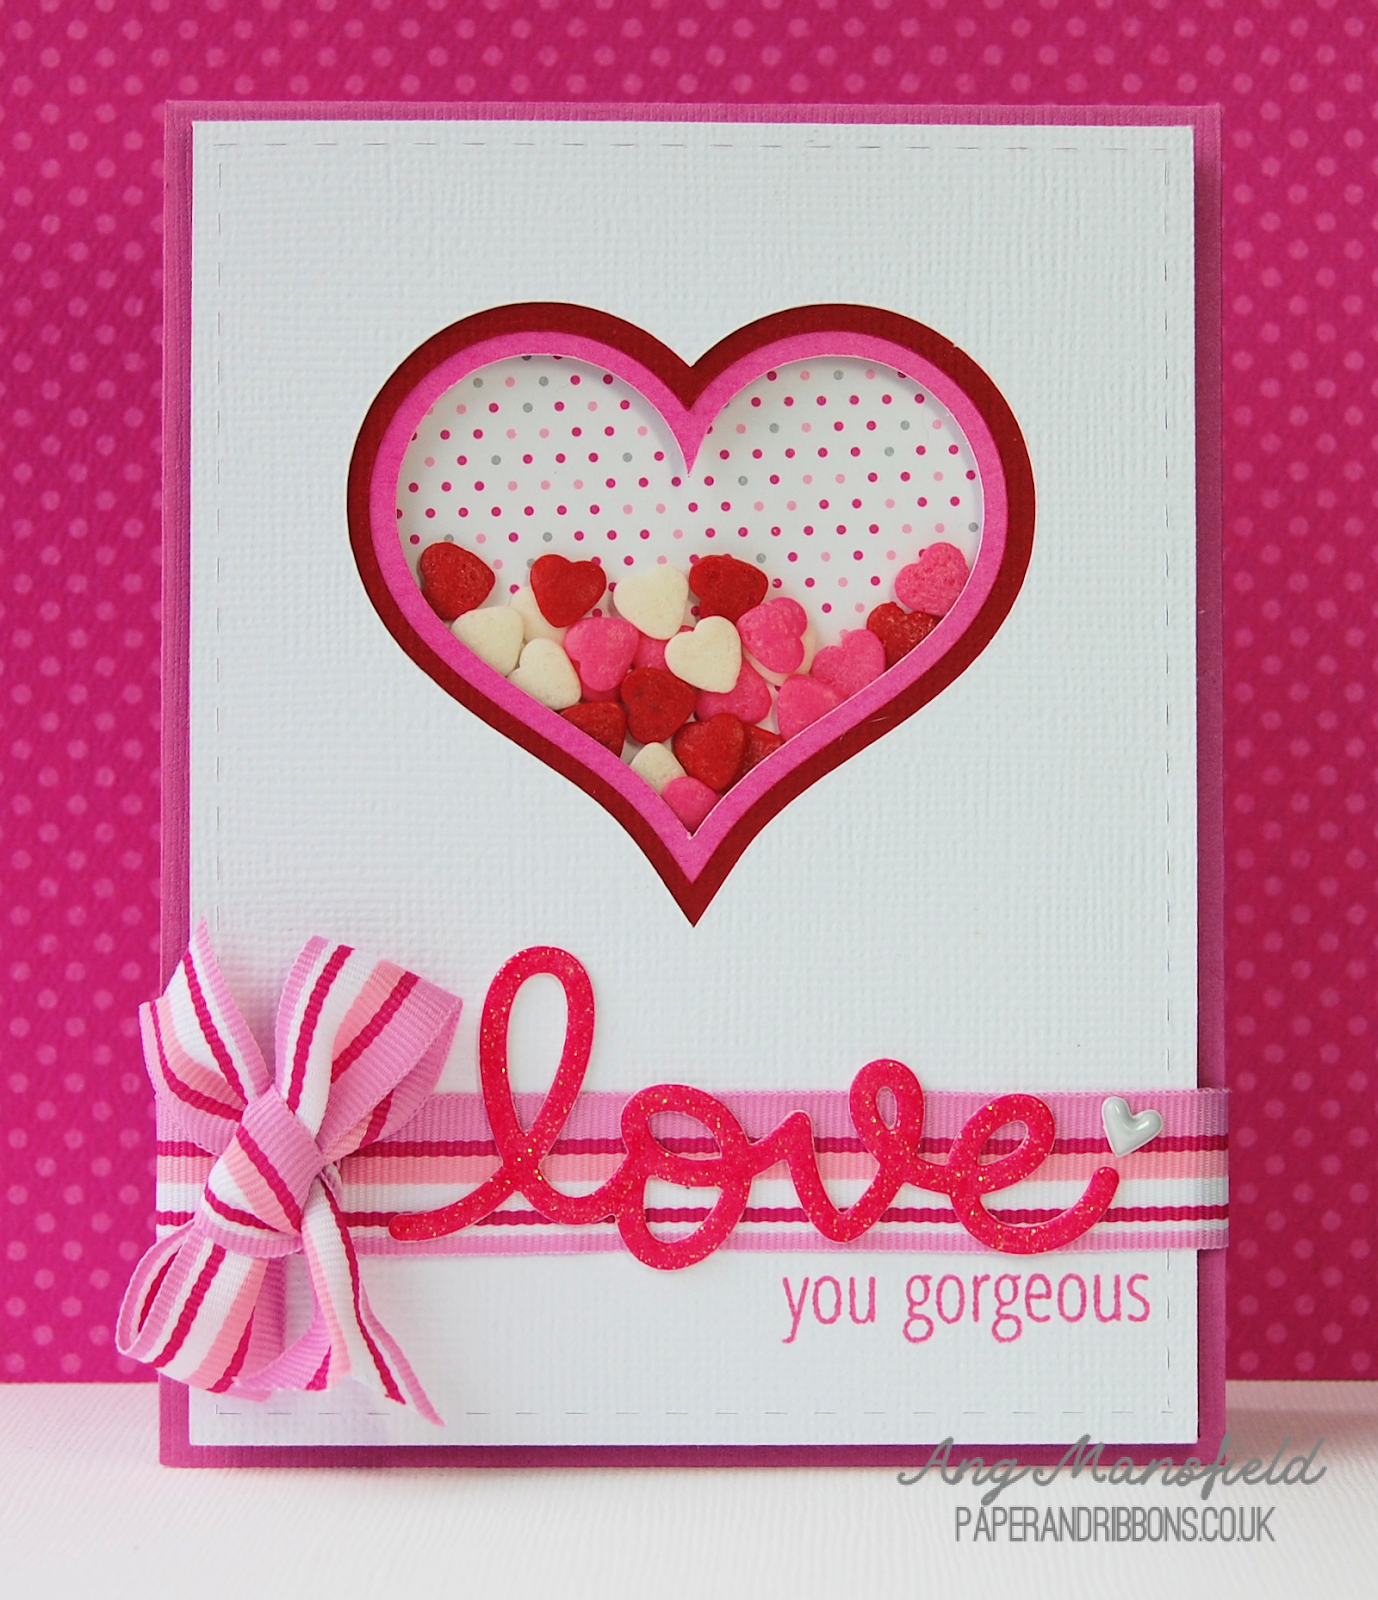 Paper and Ribbons: 24 Valentine's Day Cards Round Up
